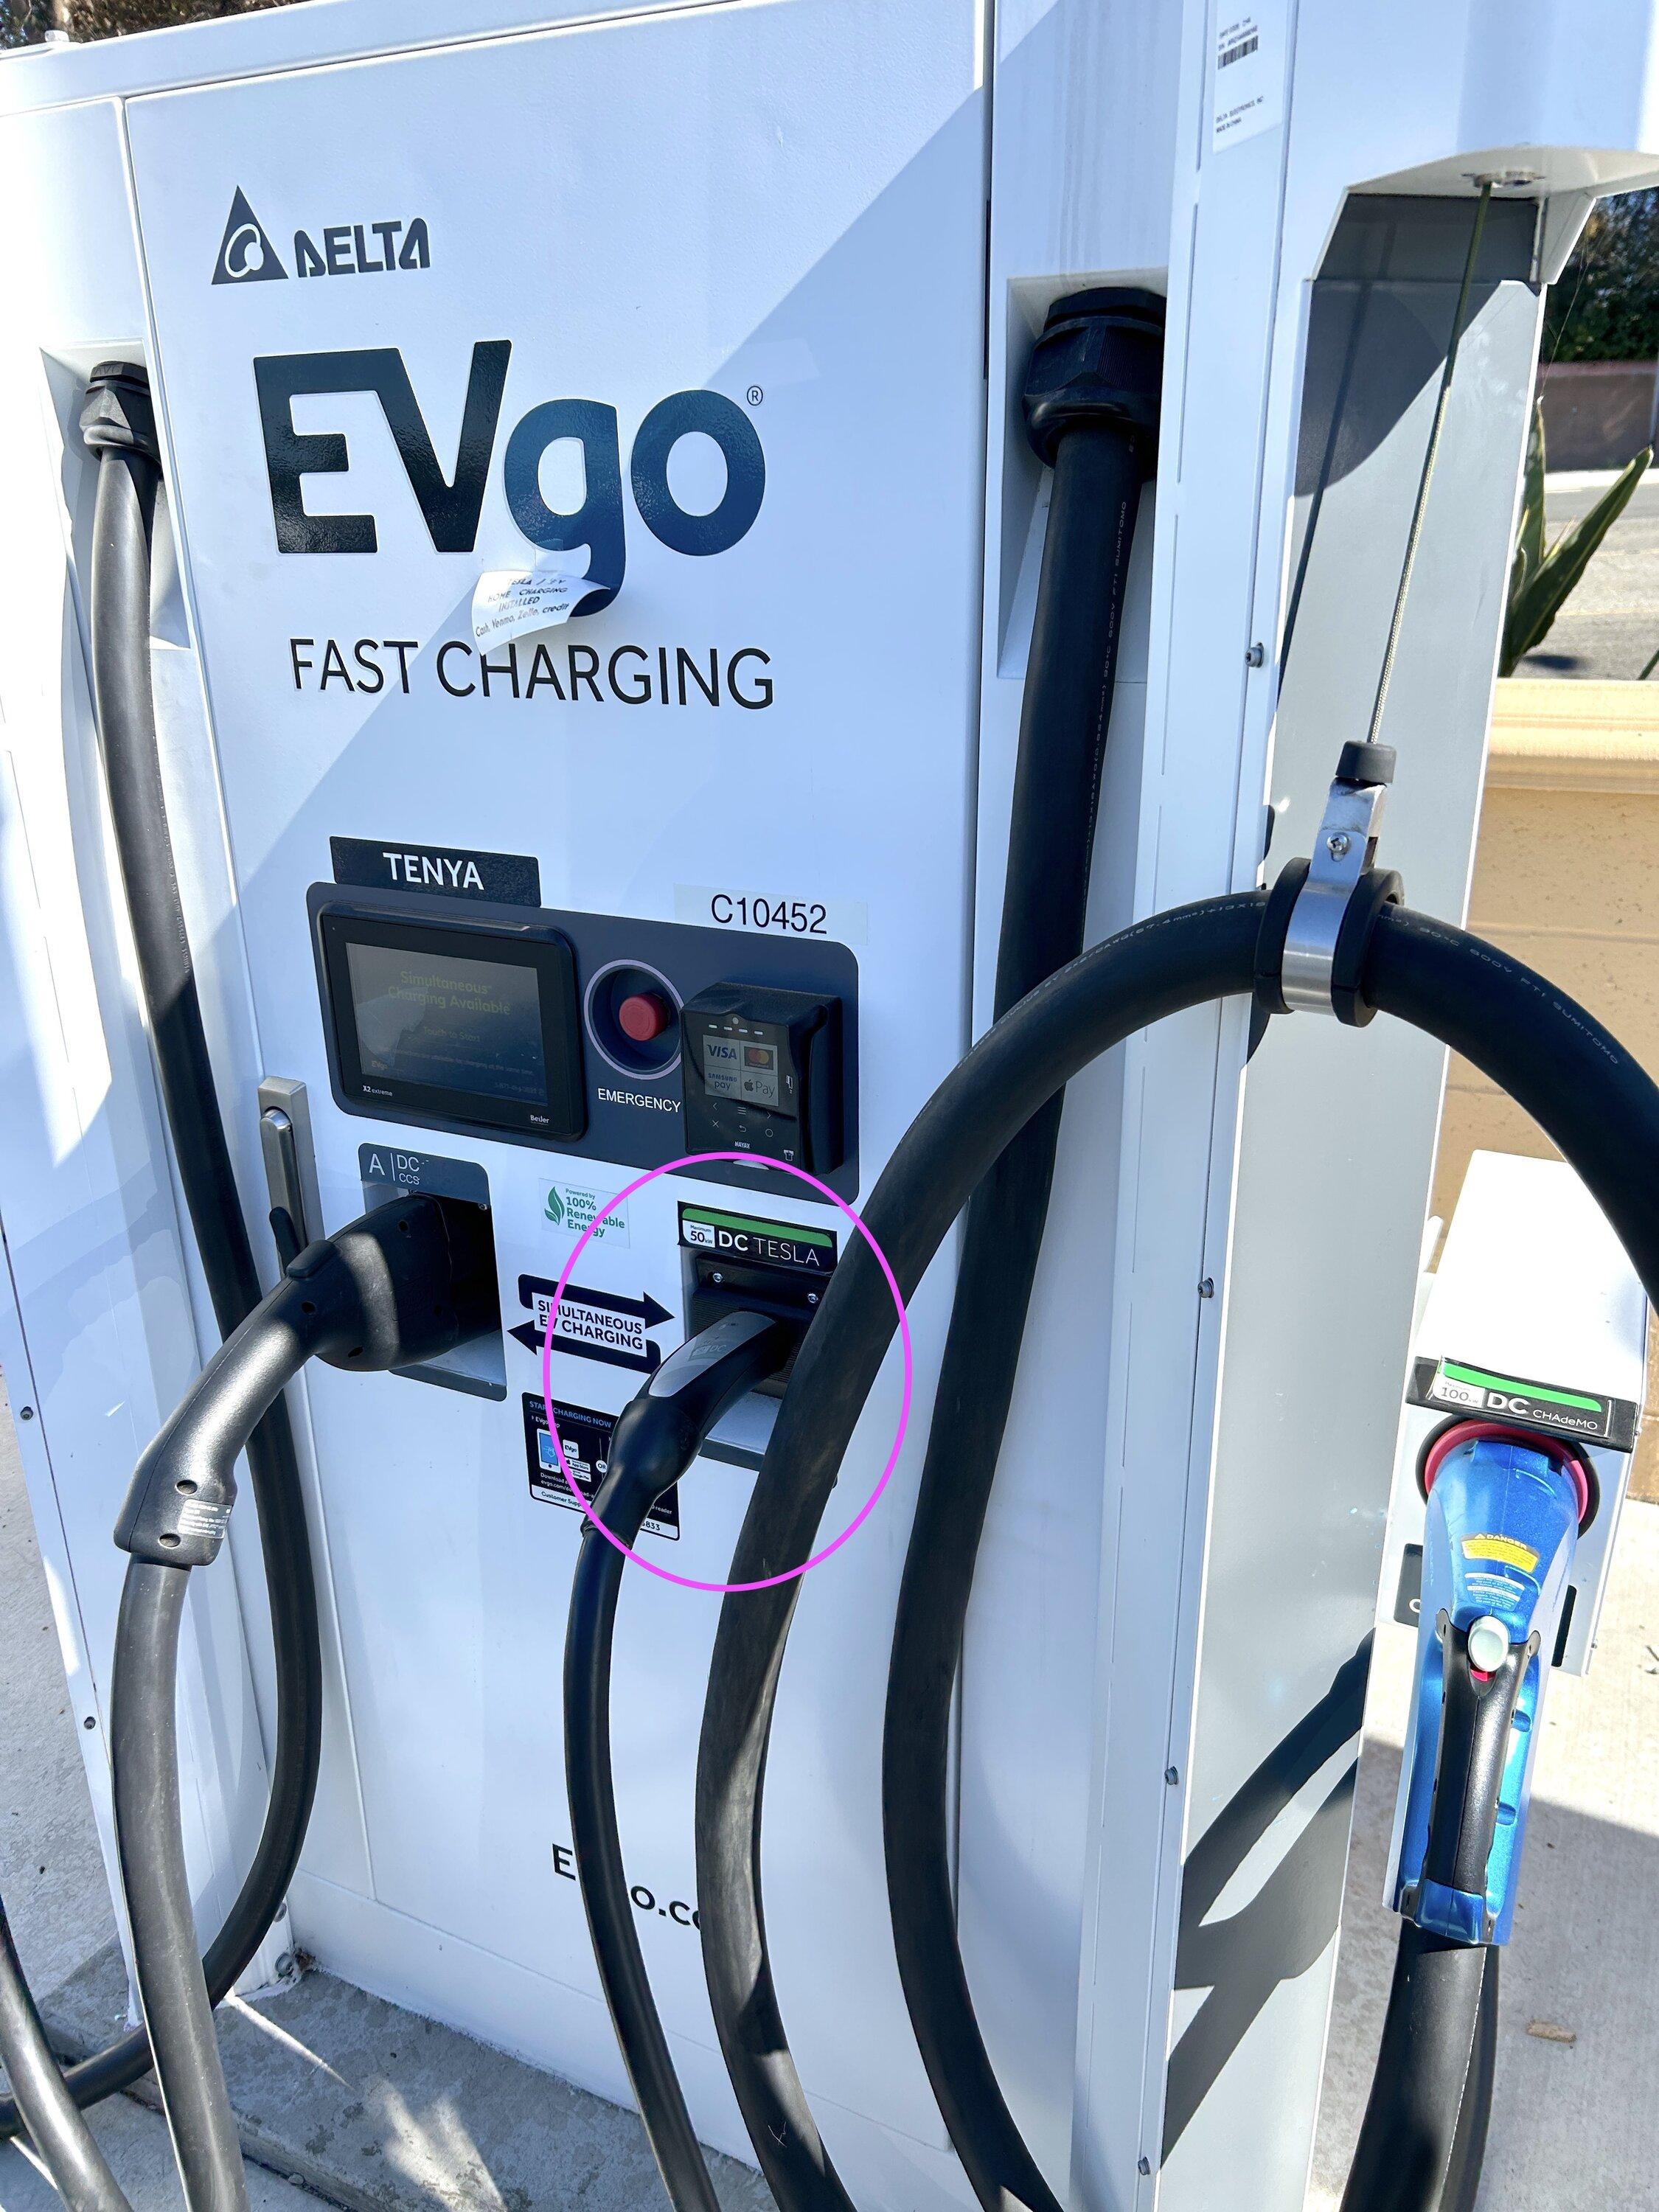 Ford F-150 Lightning EVgo Time of Use (TOU) -  The Future of DC Fast Charging Pricing? IMG_0108.JPG